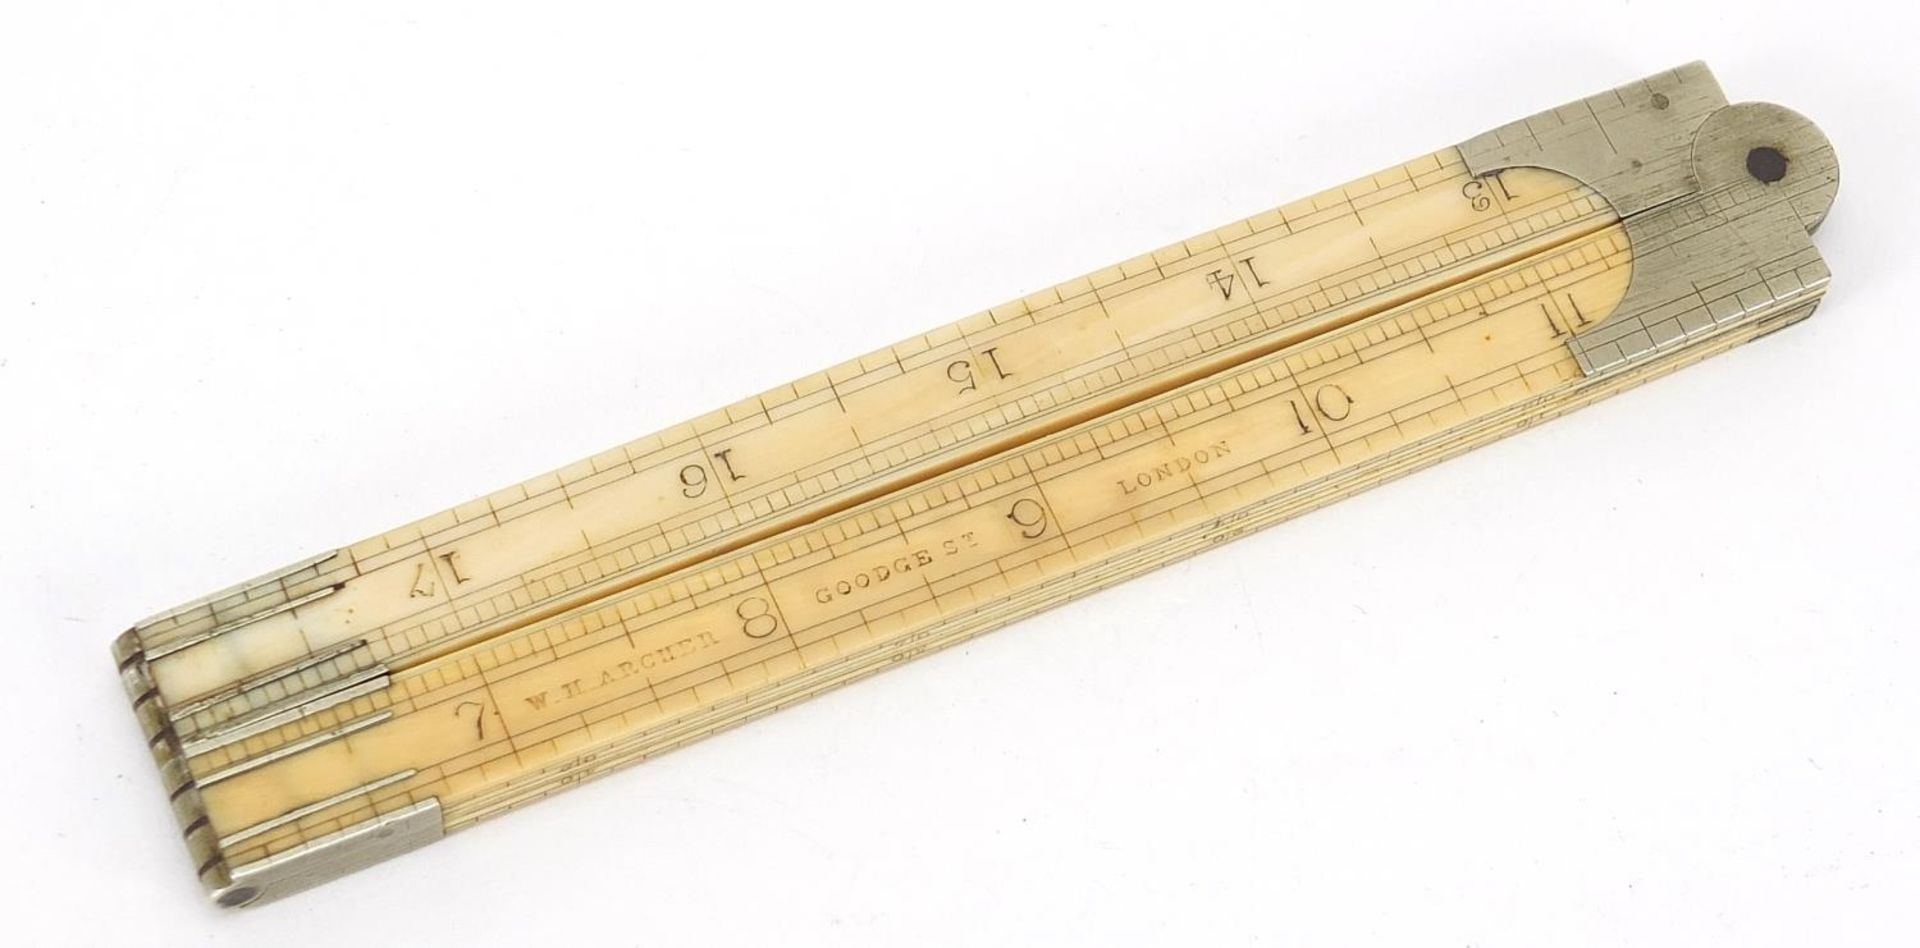 19th century ivory folding rule by W H Archer of Goodge St London, 16cm in length when closed - Image 2 of 3